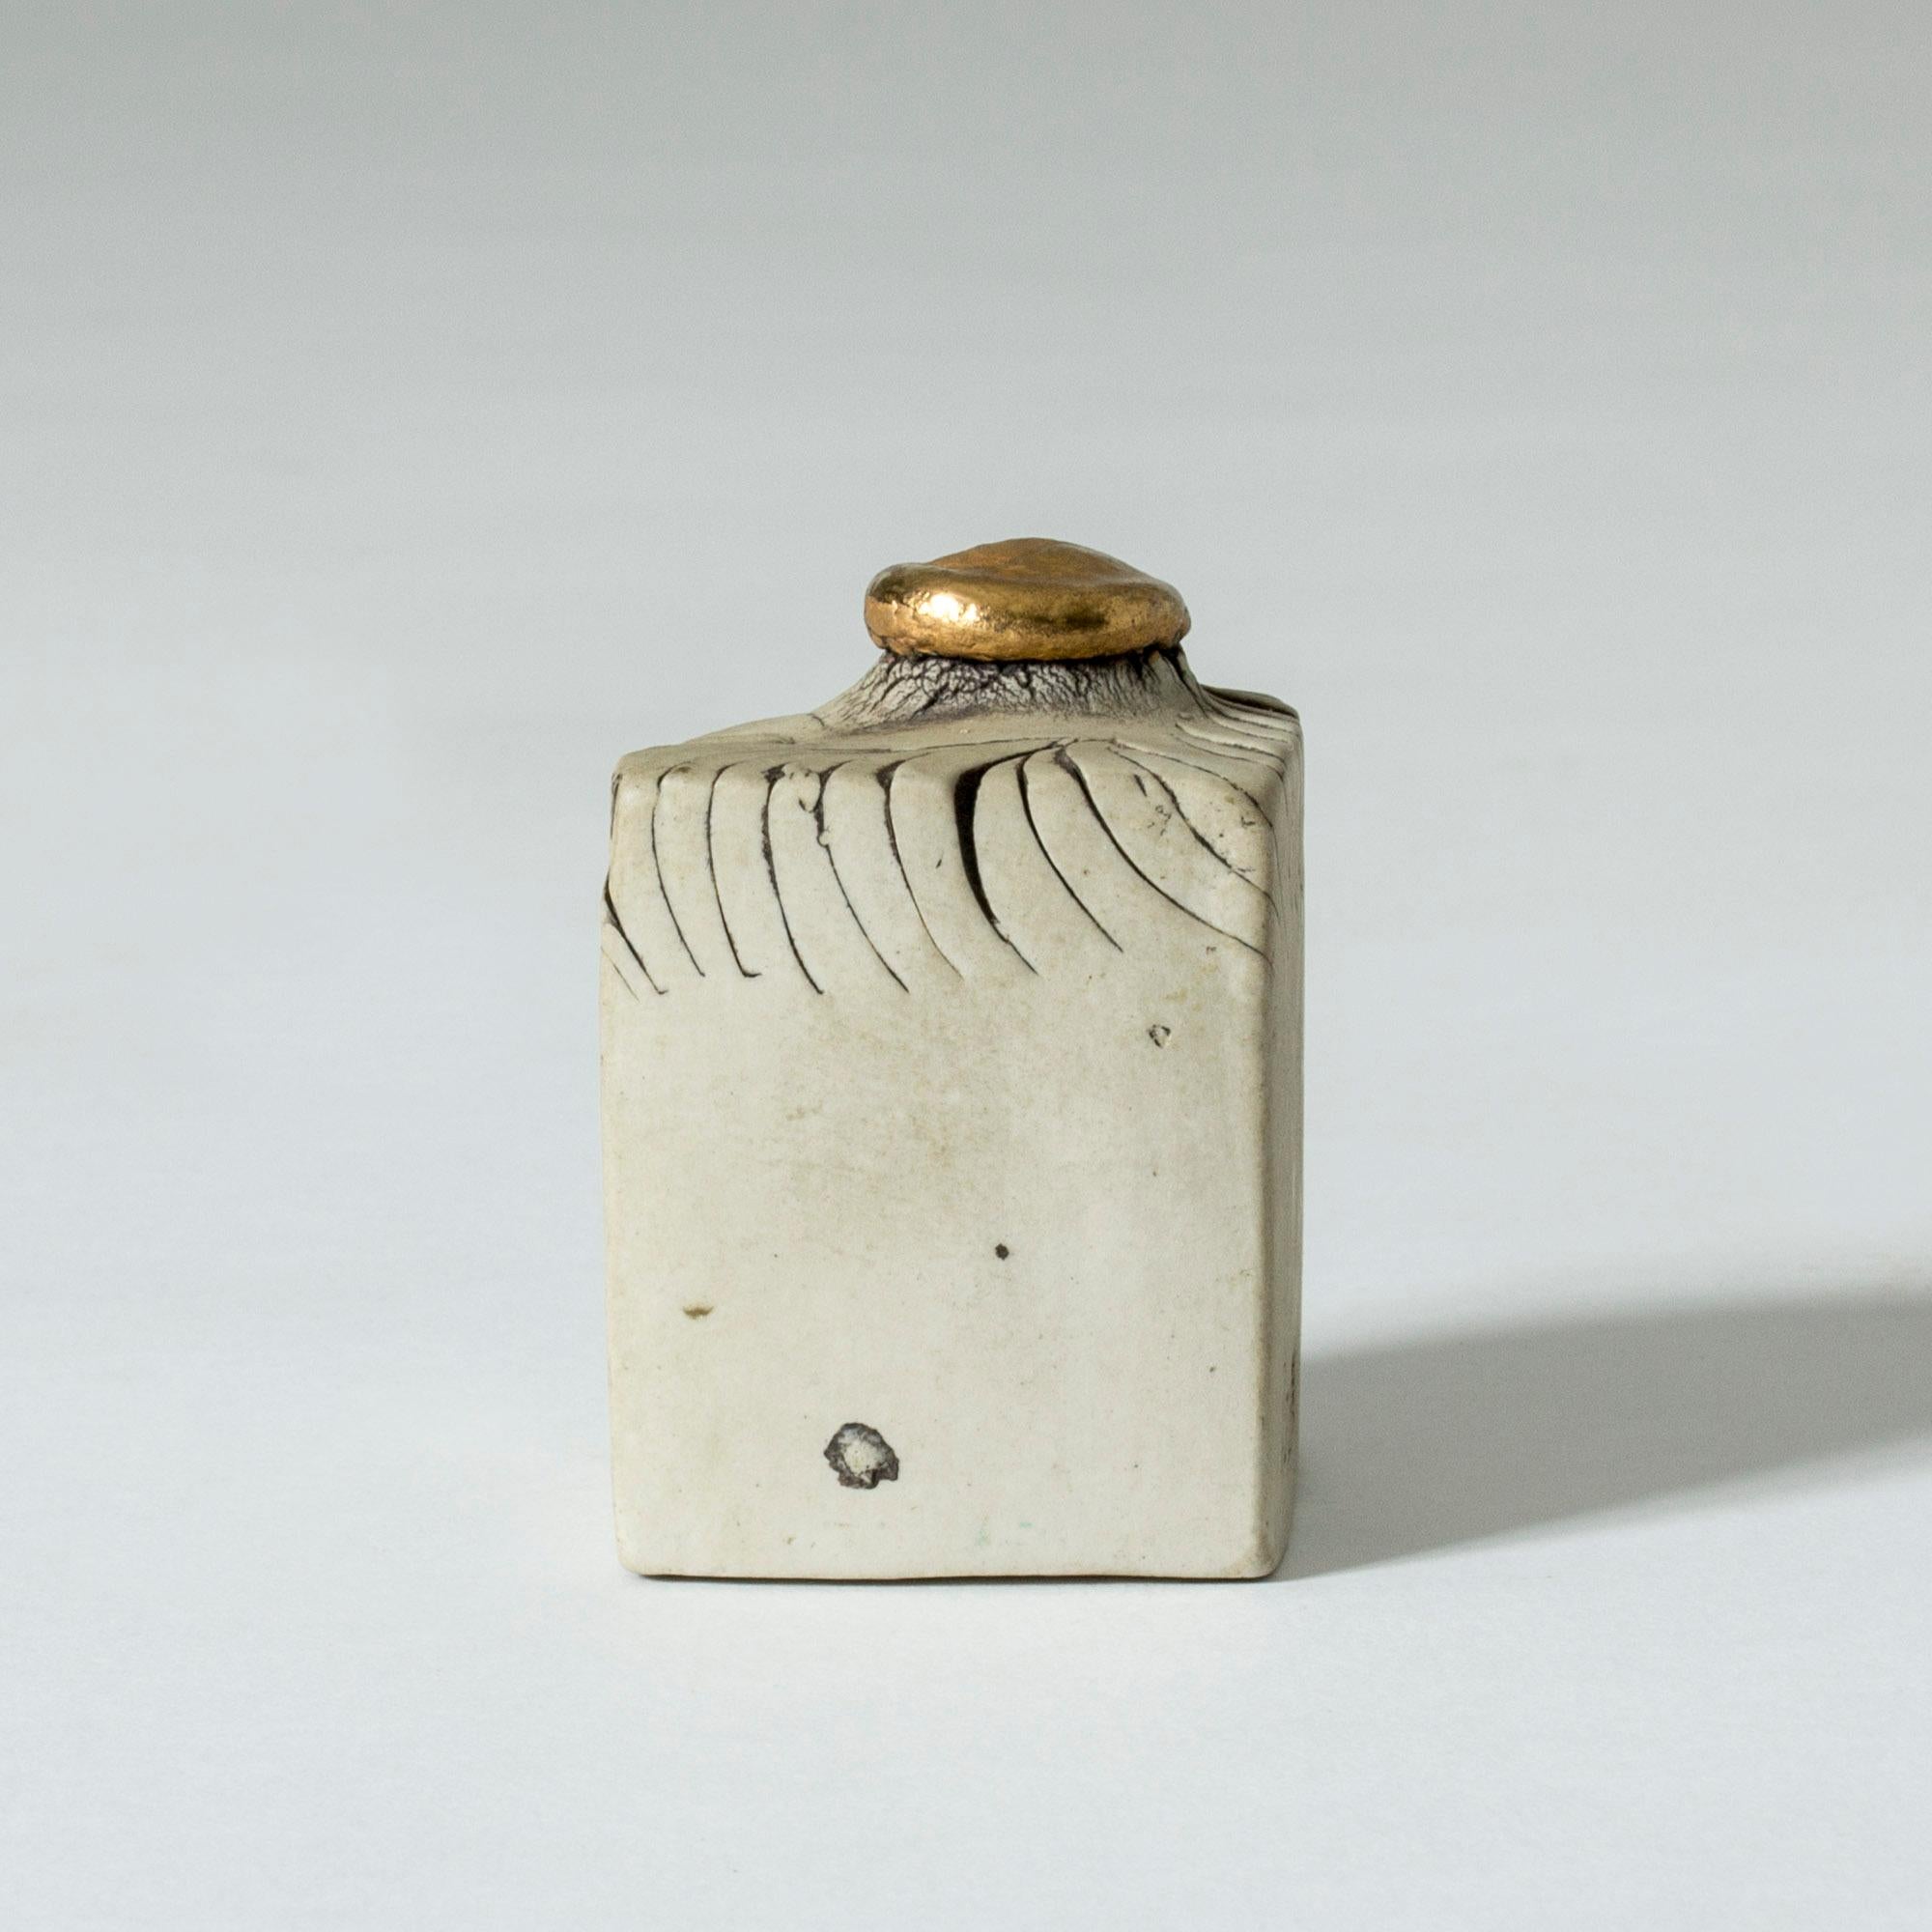 Precious little stoneware sculpture by Bengt Berglund in a suggestive shape. The top knob is coated with 24-karat gold. The perfect gold wedding gift, perhaps.